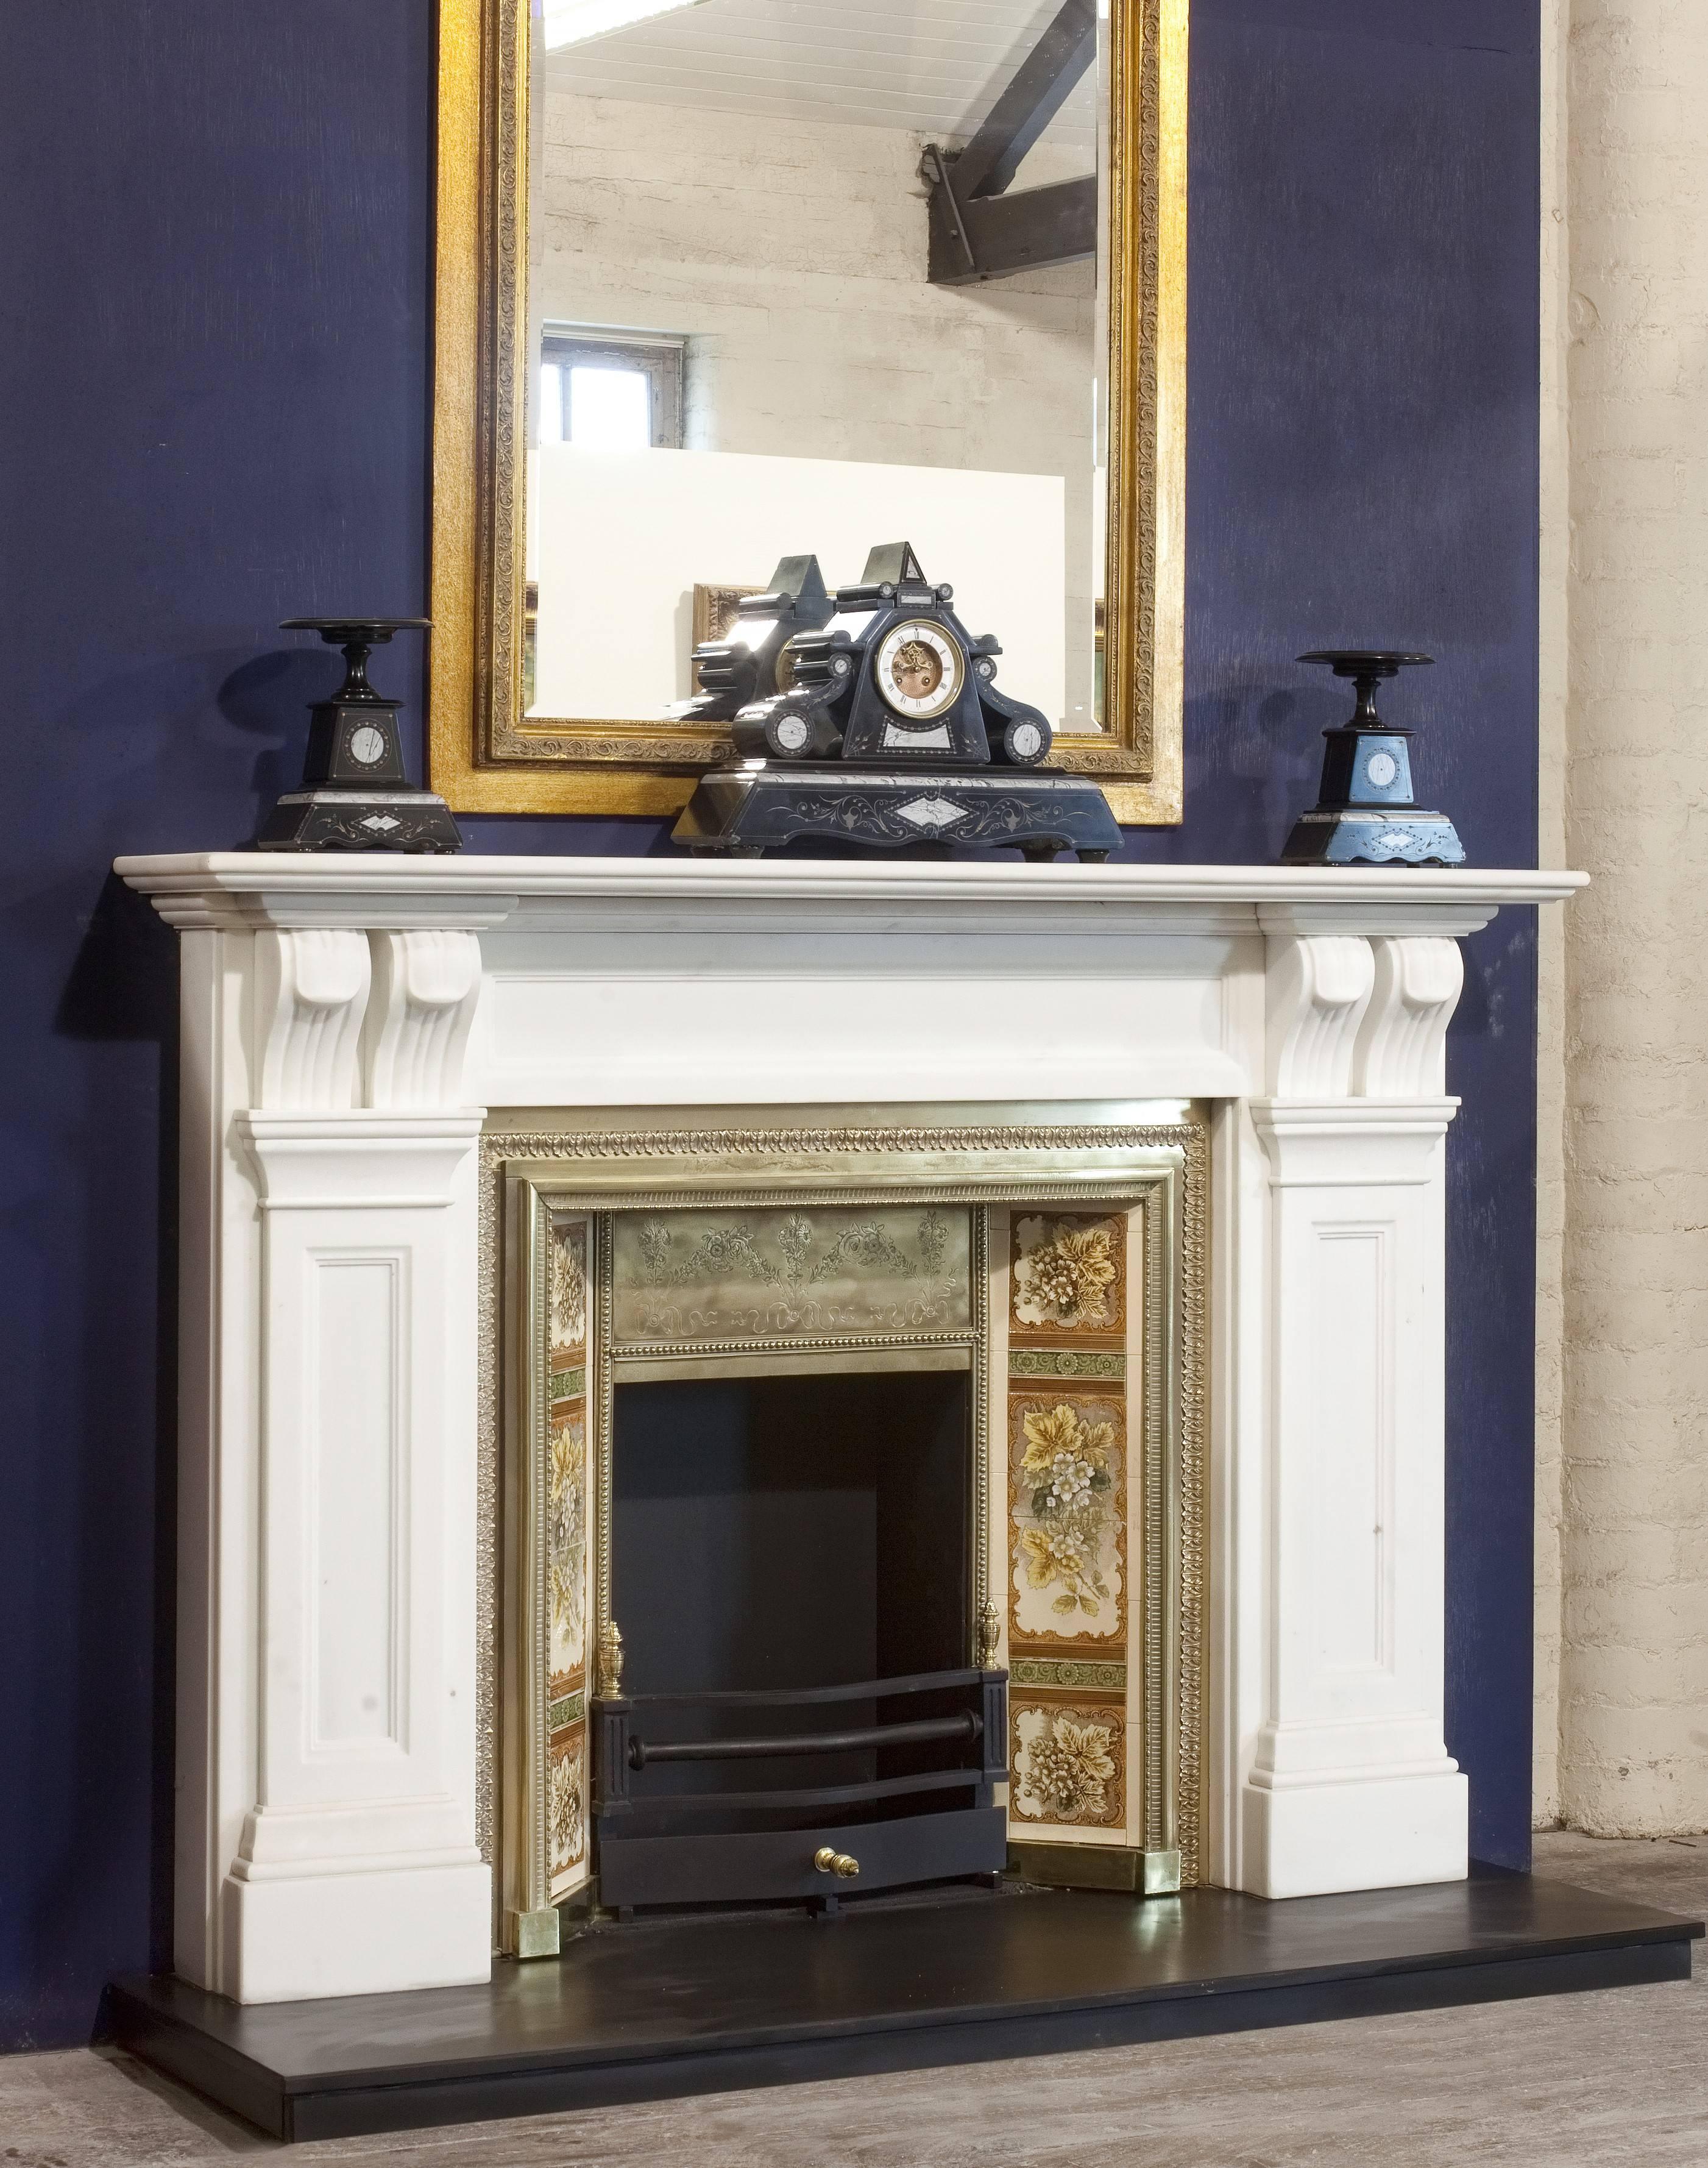 1930s reproduction of Victorian fire surround hand-carved in pure white marble.
This fire surround has hand-carved recessed panels on the frieze and pilaster jambs, the hand-carved twin corbels support a two-tier mantel.
The marble fireplace